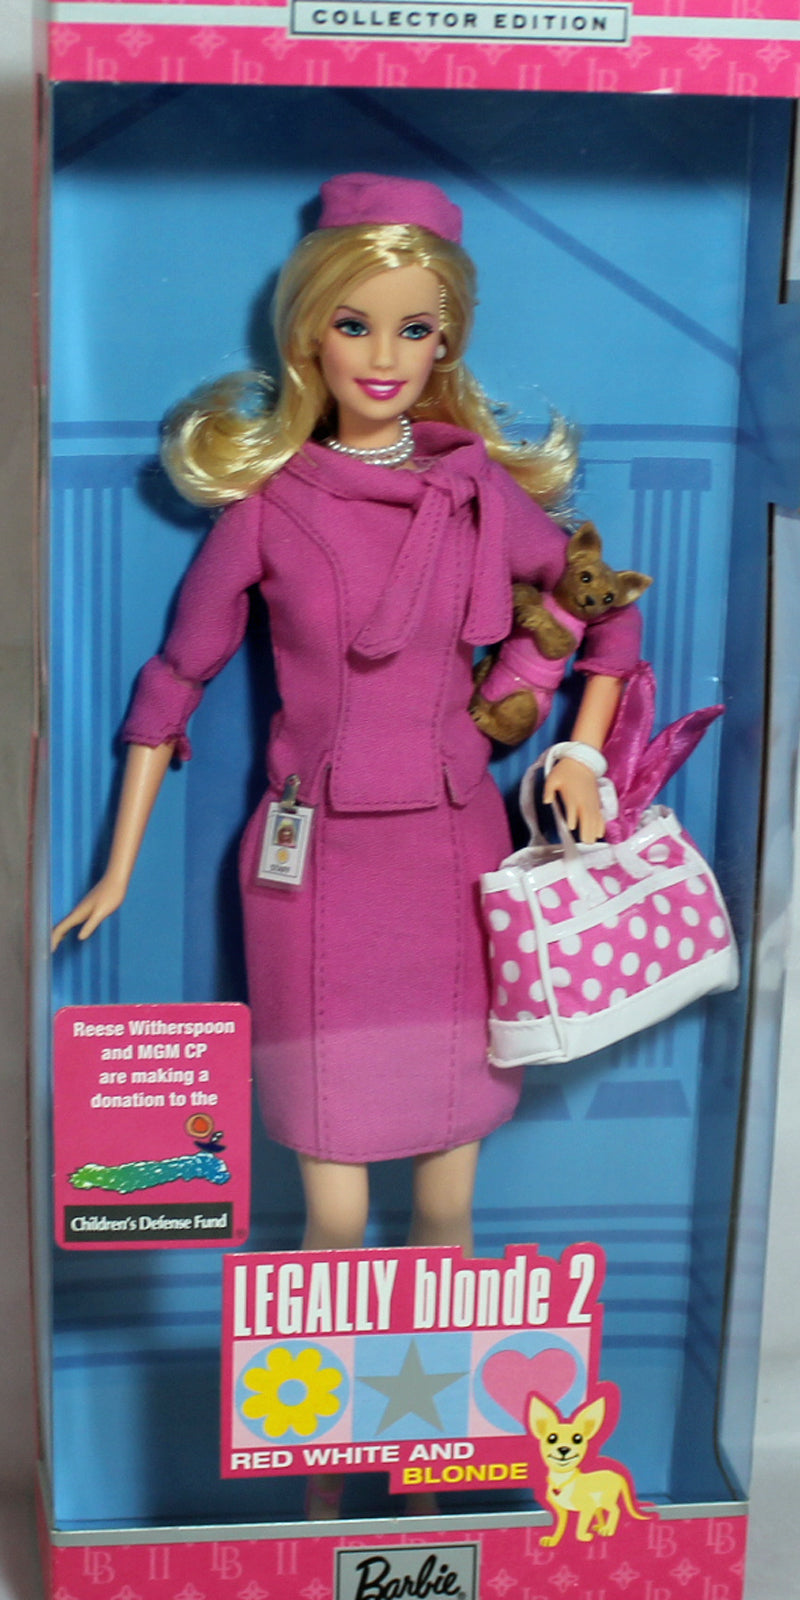 2003 Red White & Blonde Barbie (B9234) - Legally Blonde